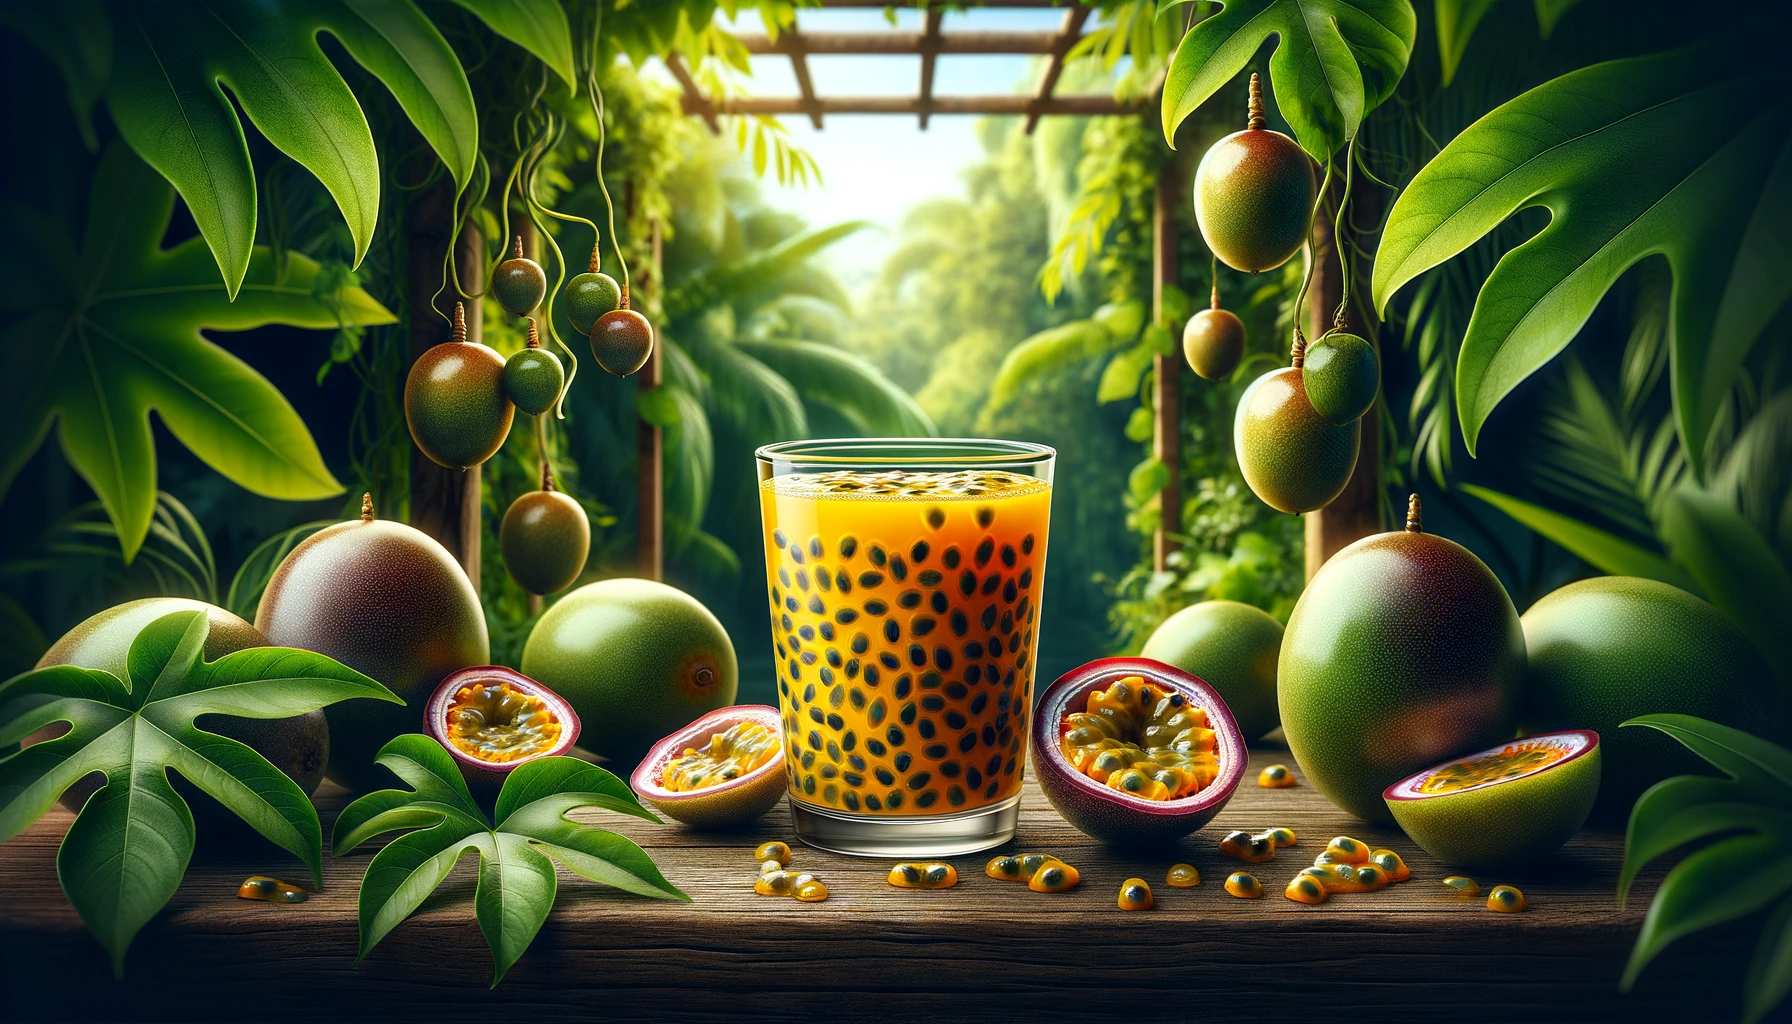 Passion fruit juice in a glass set against a tropical backdrop with vines and leaves, highlighting the beverage's rich golden color and floating seeds.